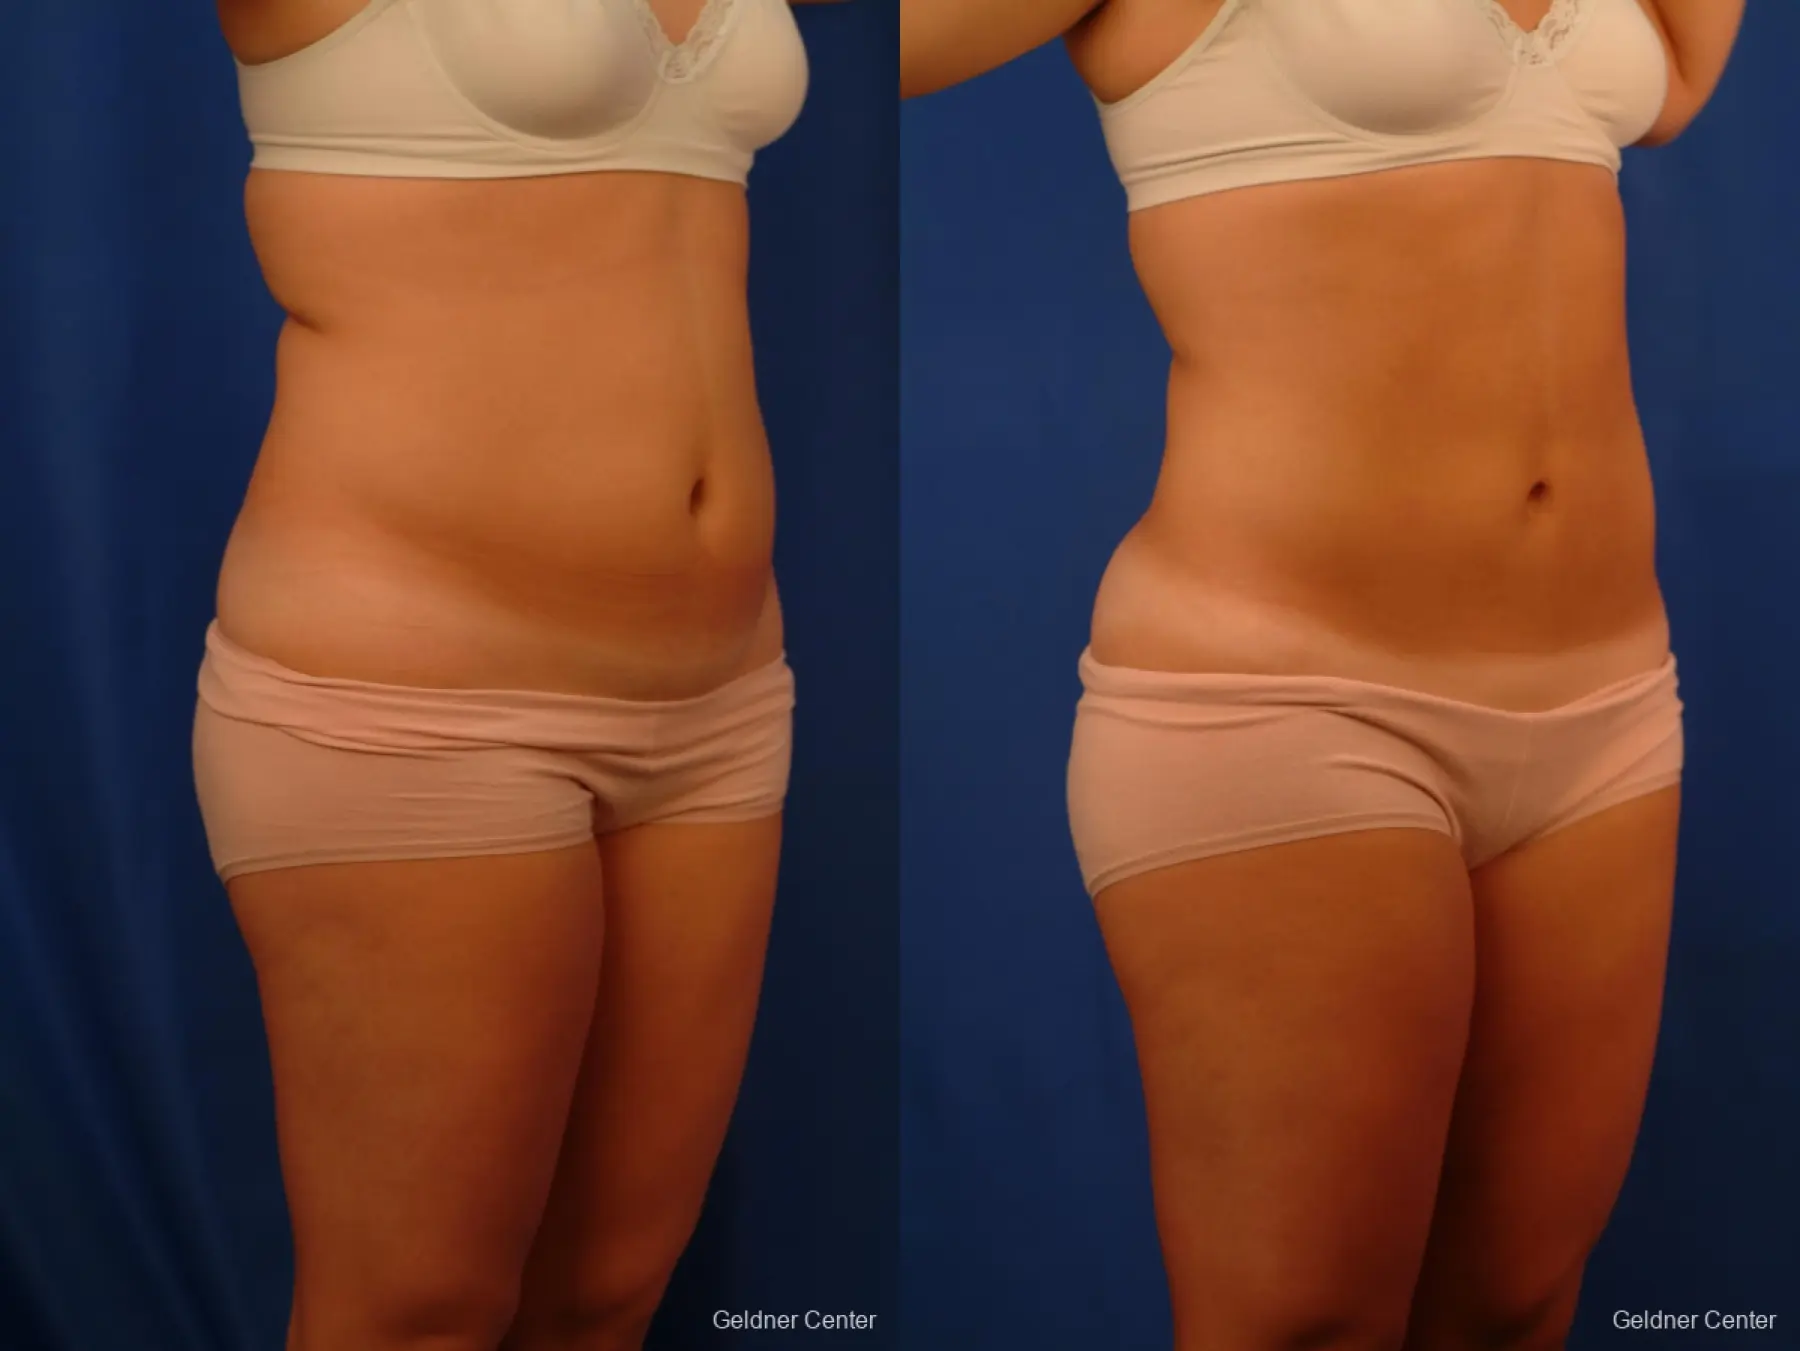 Vaser lipo patient 2514 before and after photos - Before and After 2